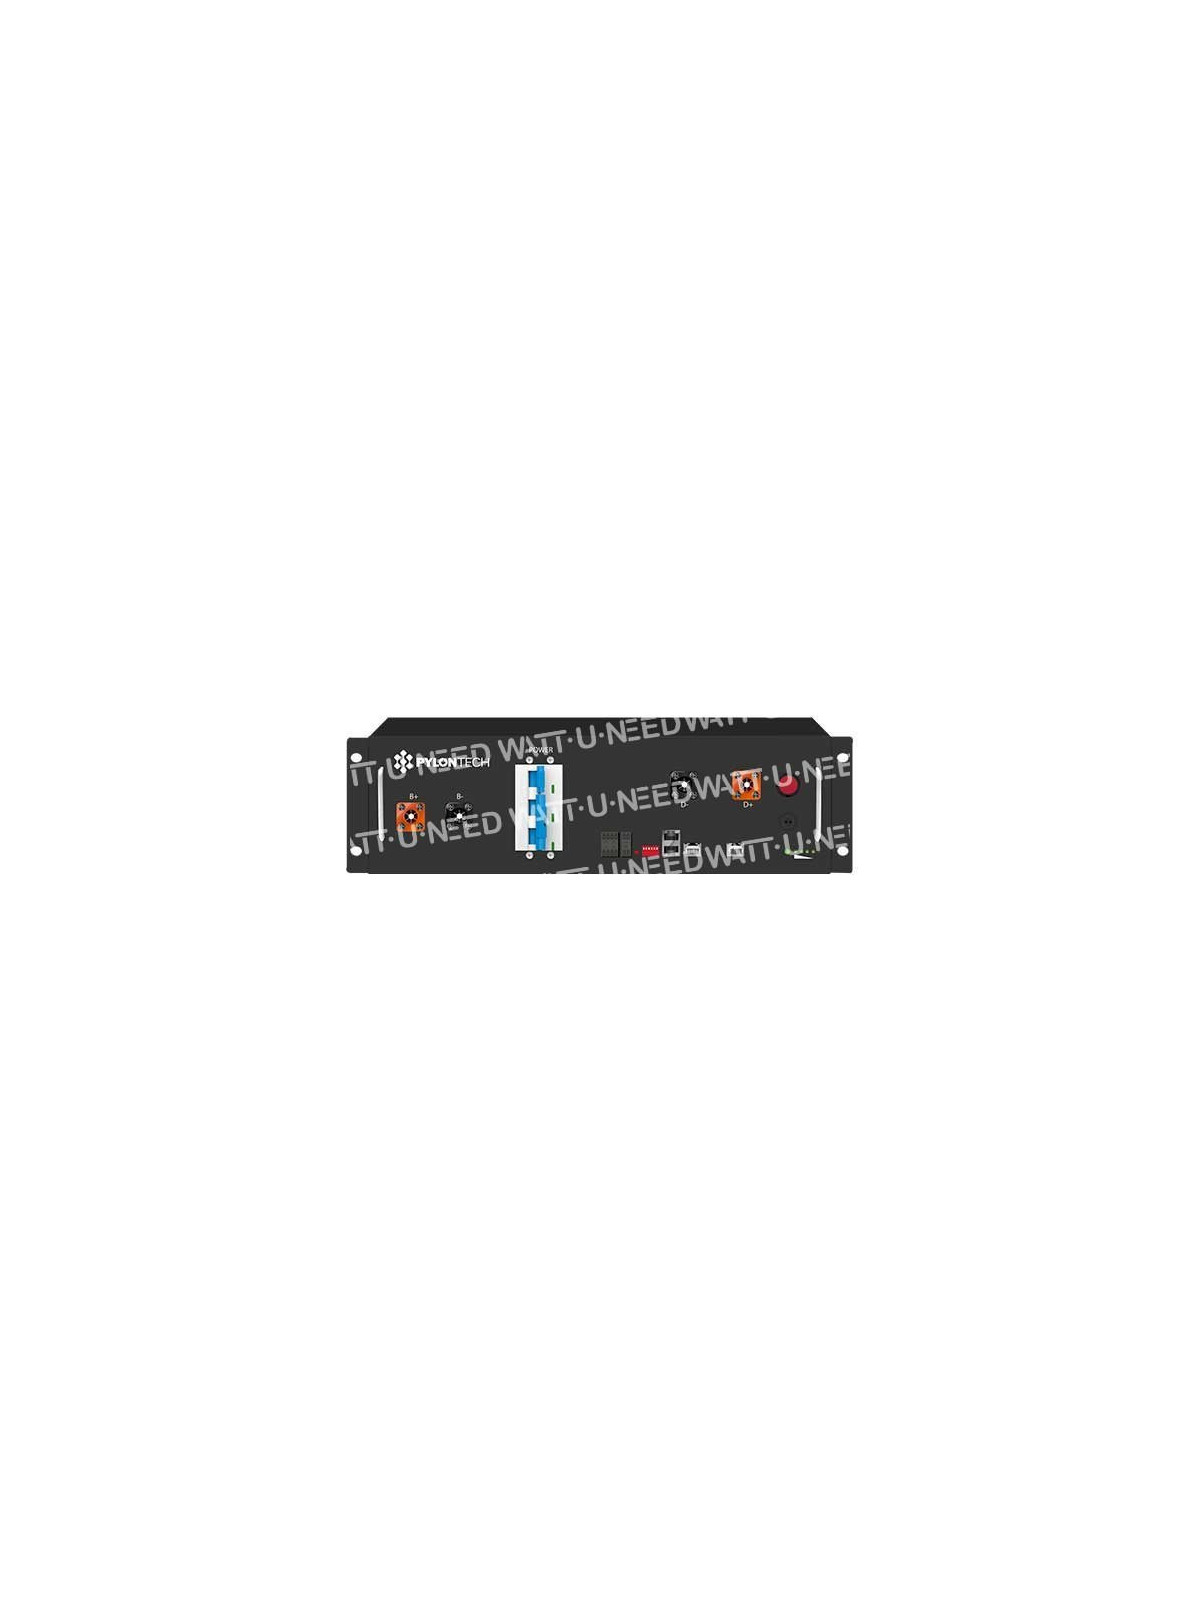 Pylontech Lithium Battery H48050 +350 with BMS